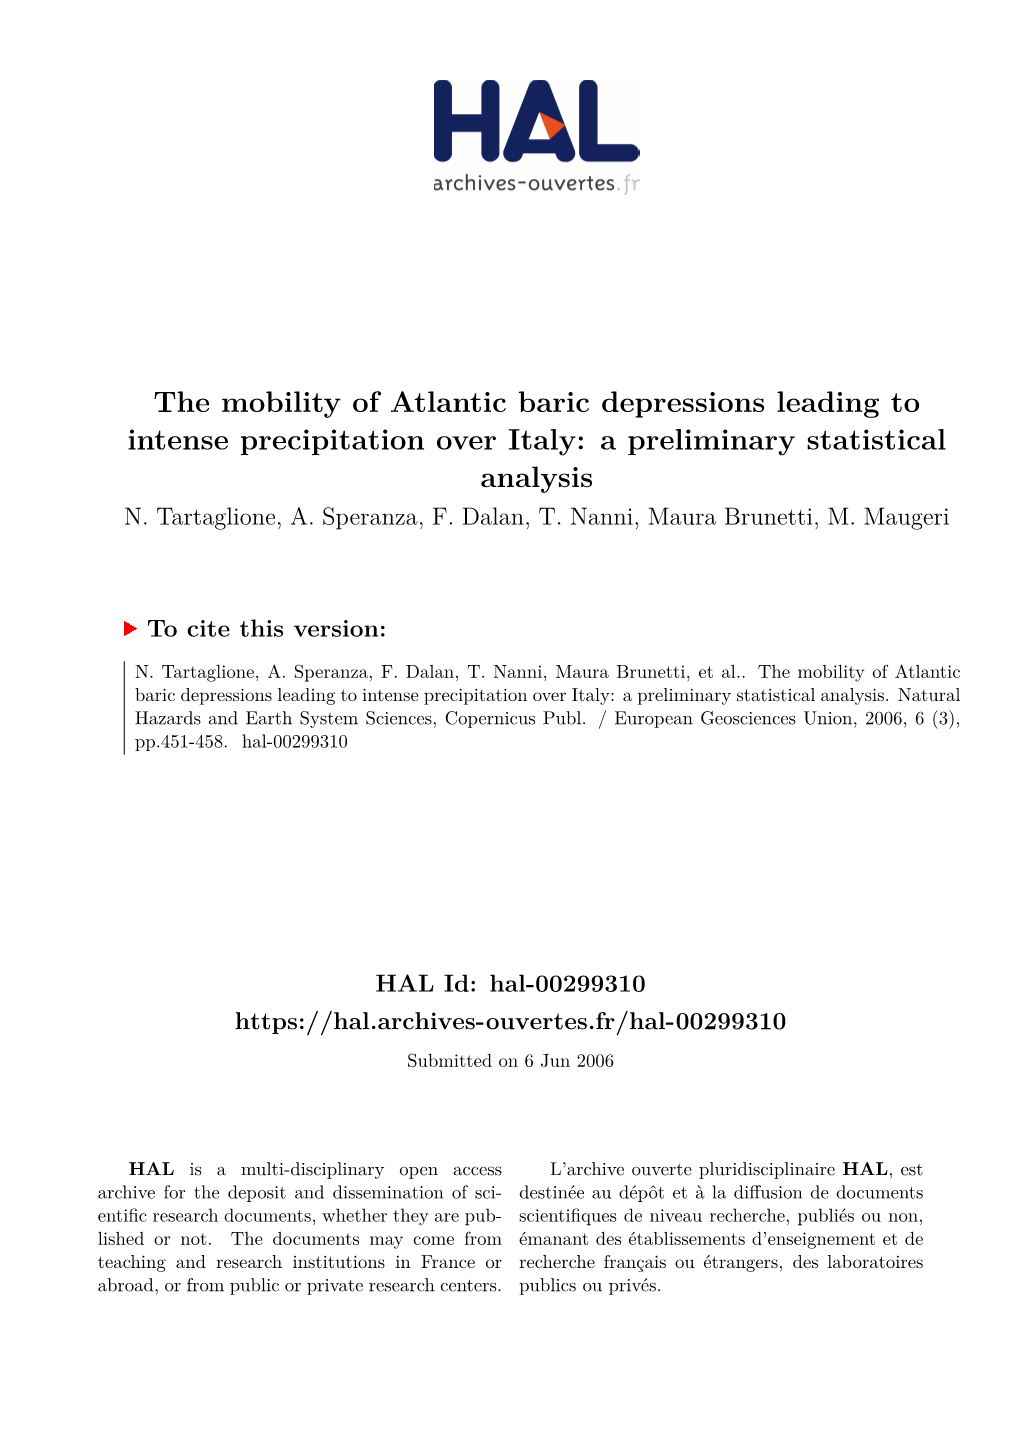 The Mobility of Atlantic Baric Depressions Leading to Intense Precipitation Over Italy: a Preliminary Statistical Analysis N